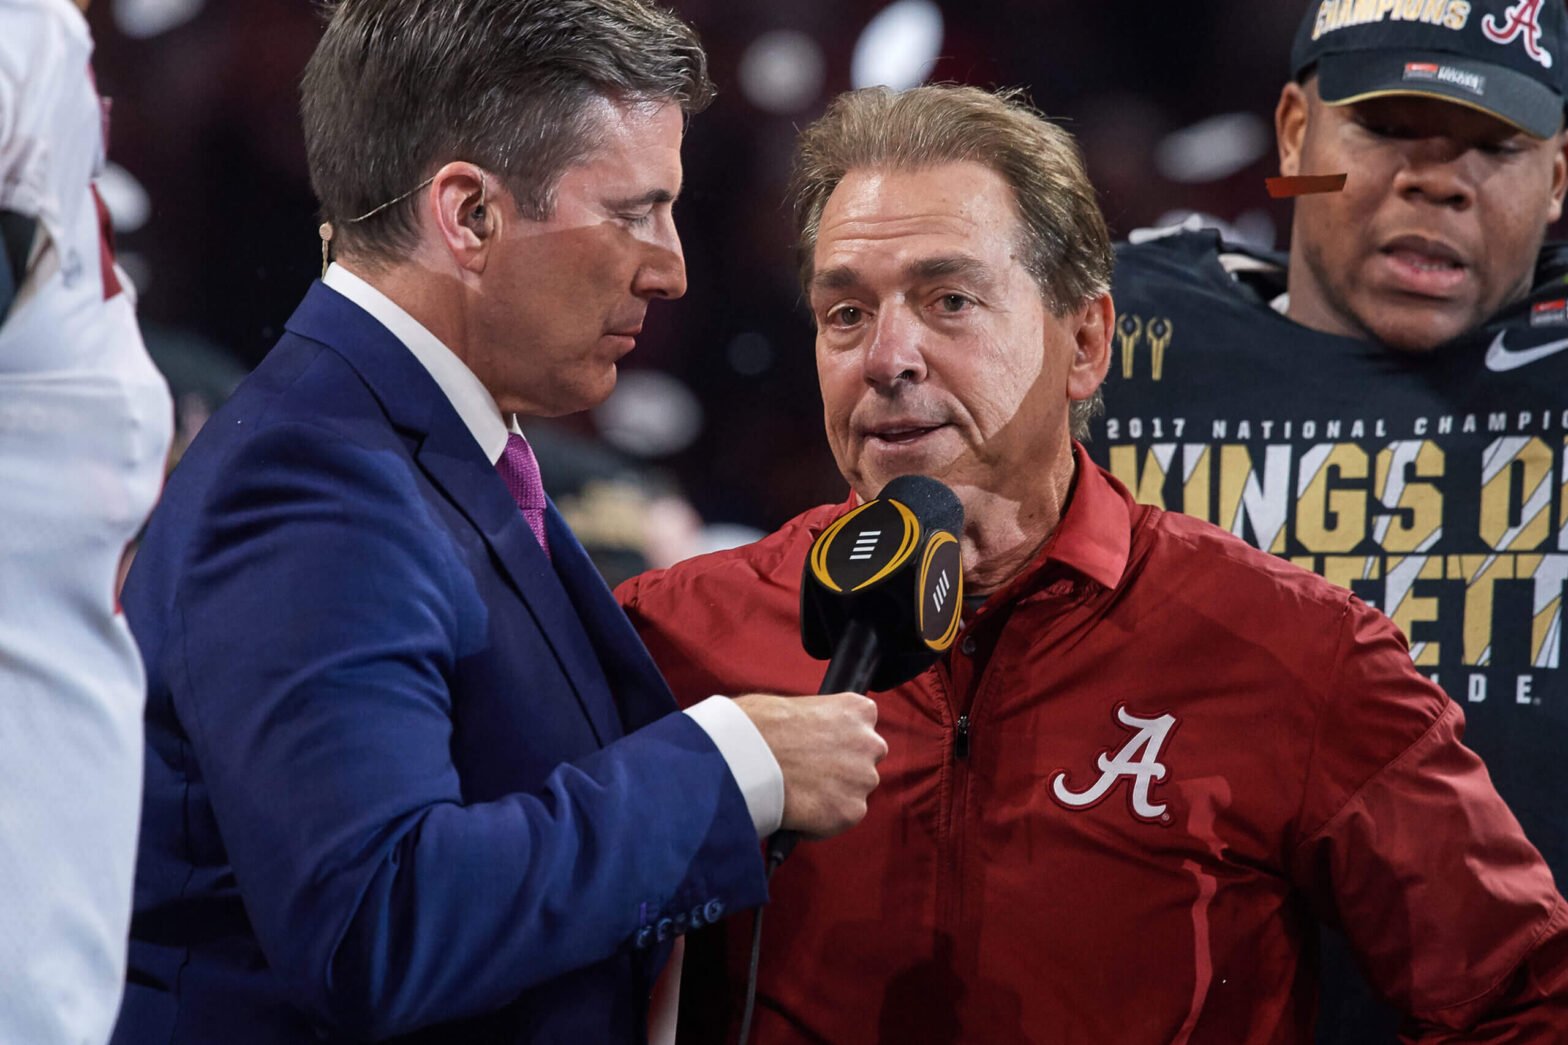 nick-saban-to-join-college-gameday-cast-as-analyst